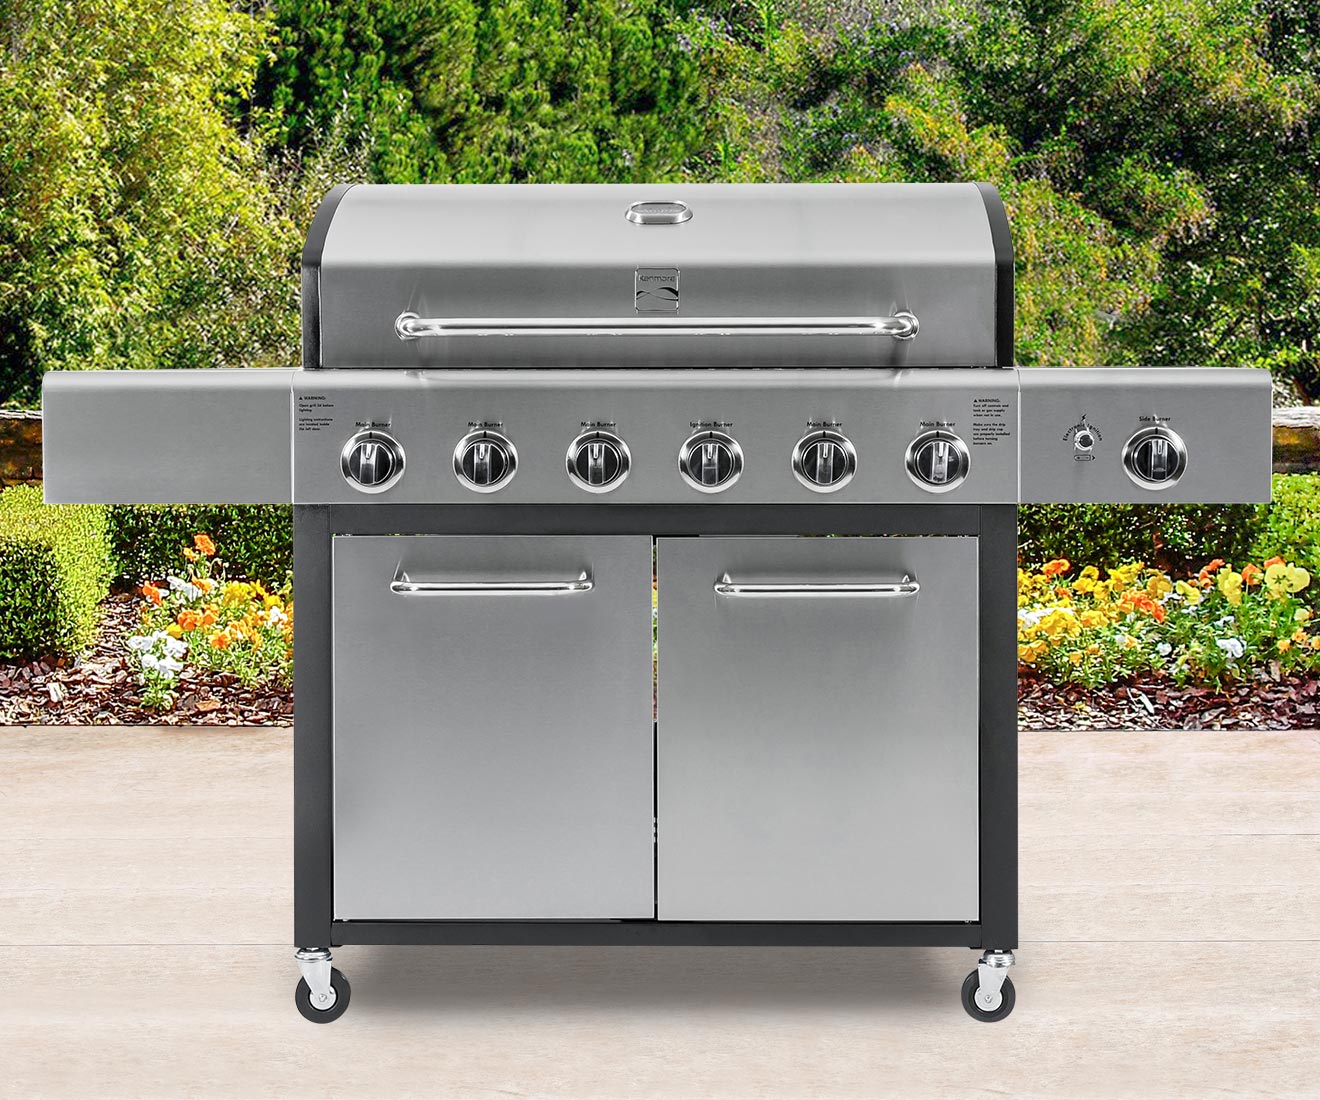 Kenmore 6-Burner Gas Grill with Side Burner PG-40611SOL Stainless Steel in Lifestyle Setting Environment